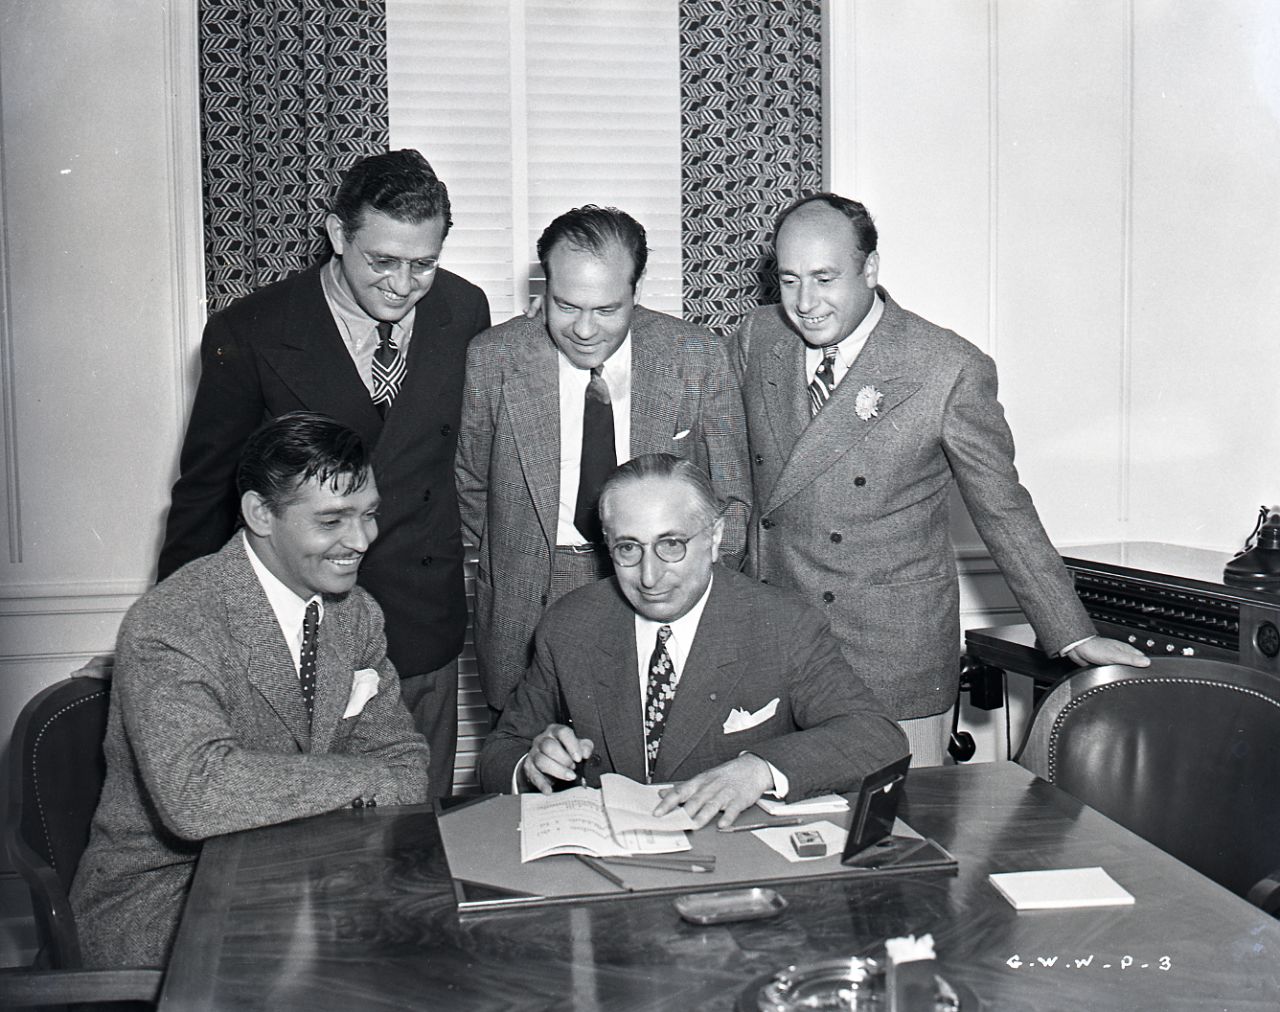 For publicity purposes, Clark Gable, the overwhelming popular choice to play Rhett Butler, pretends to sign a contract for the film under the watchful eye of producer Selznick, standing, far left, and MGM studio chief Louis B. Mayer, seated right. The star had been reluctant to tackle the role, fearing he wouldn't be able to live up to the public's expectations. With Gable now available, Selznick had to move quickly to start filming. 